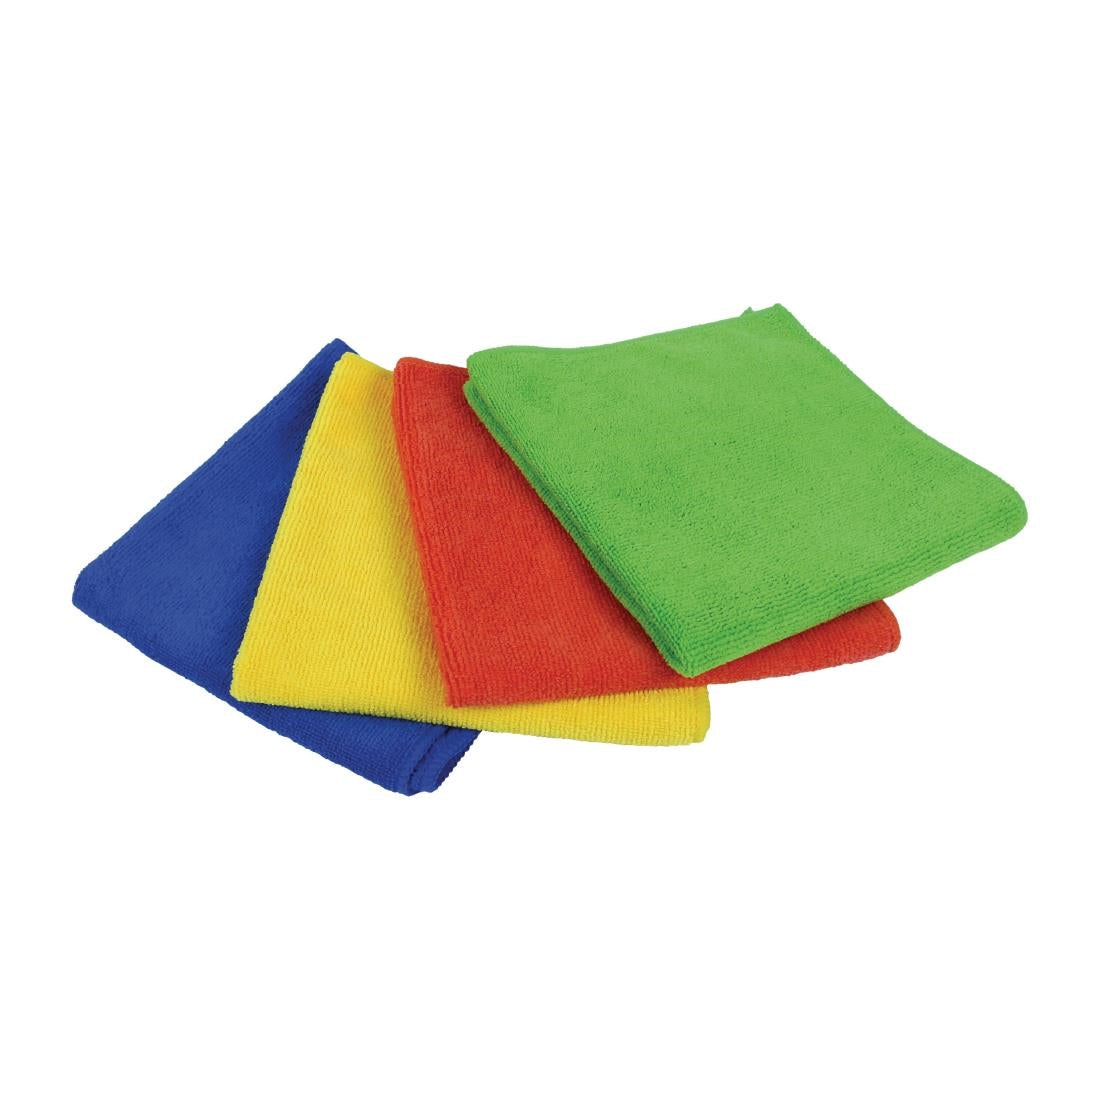 FA218 EcoTech Microfibre Cloths Yellow (Pack of 10) JD Catering Equipment Solutions Ltd